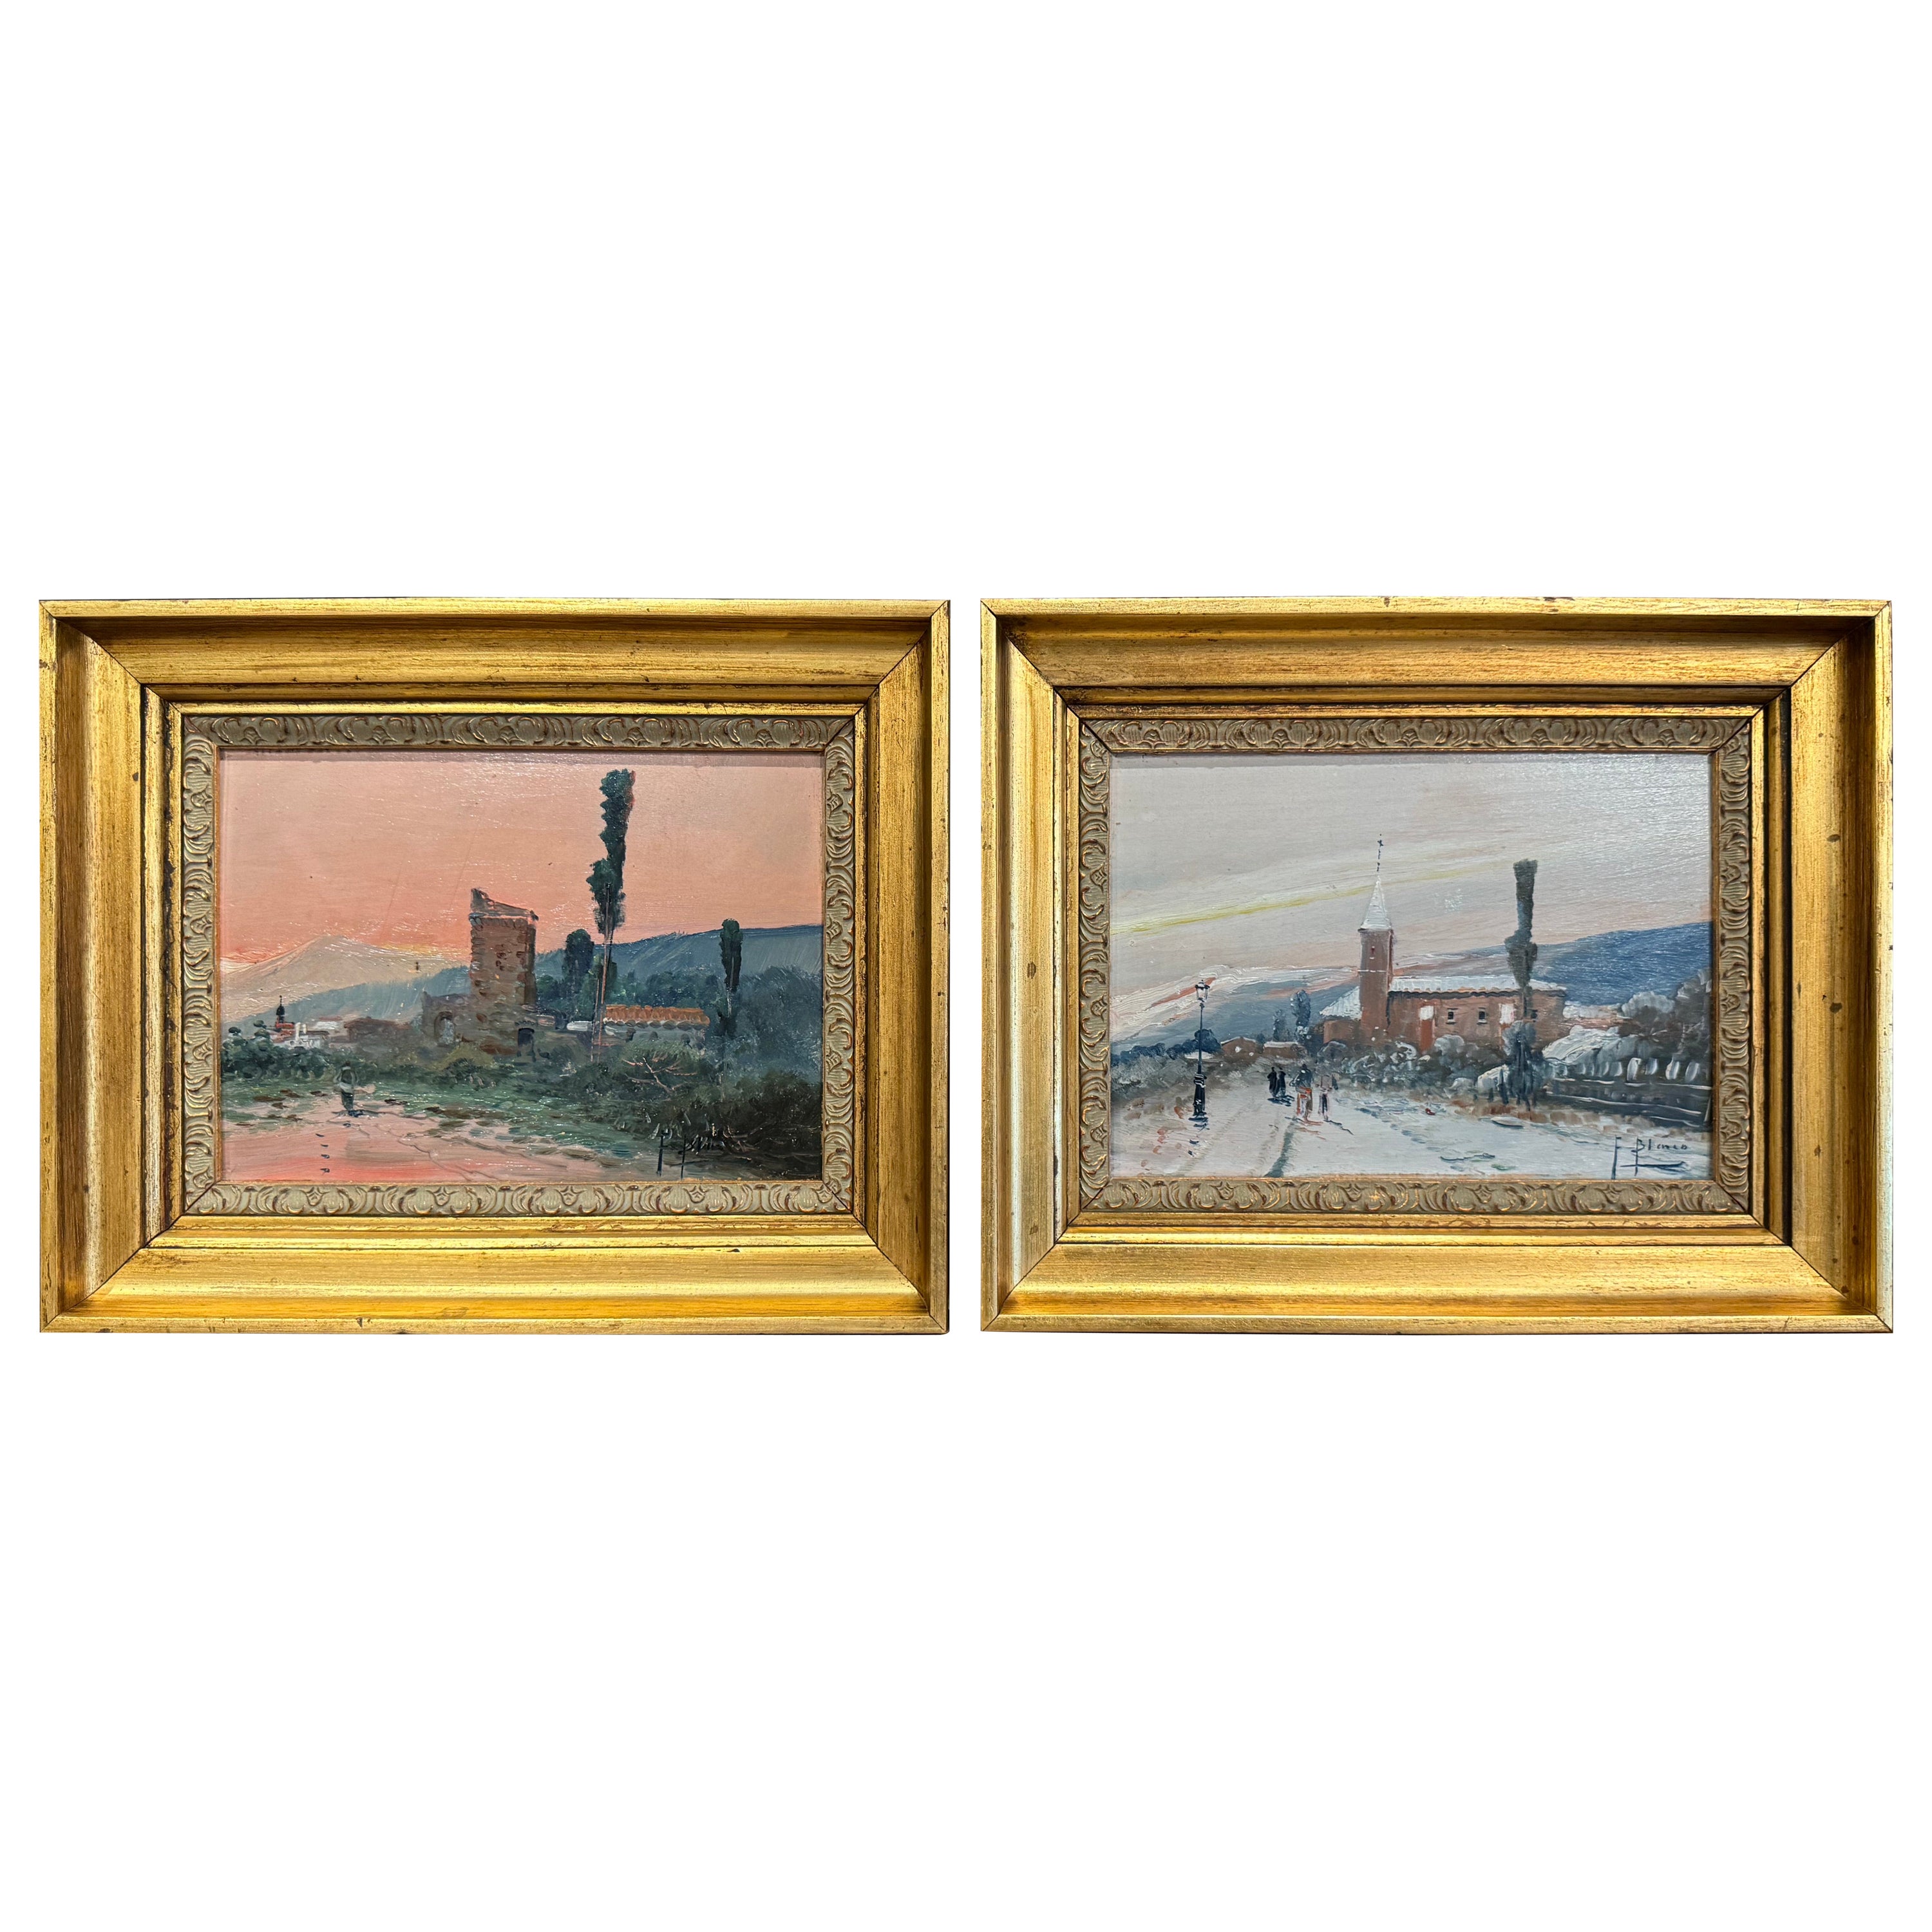 Pair Mid-Century French Paintings on Board in Gilt Frames Signed F. Blanco